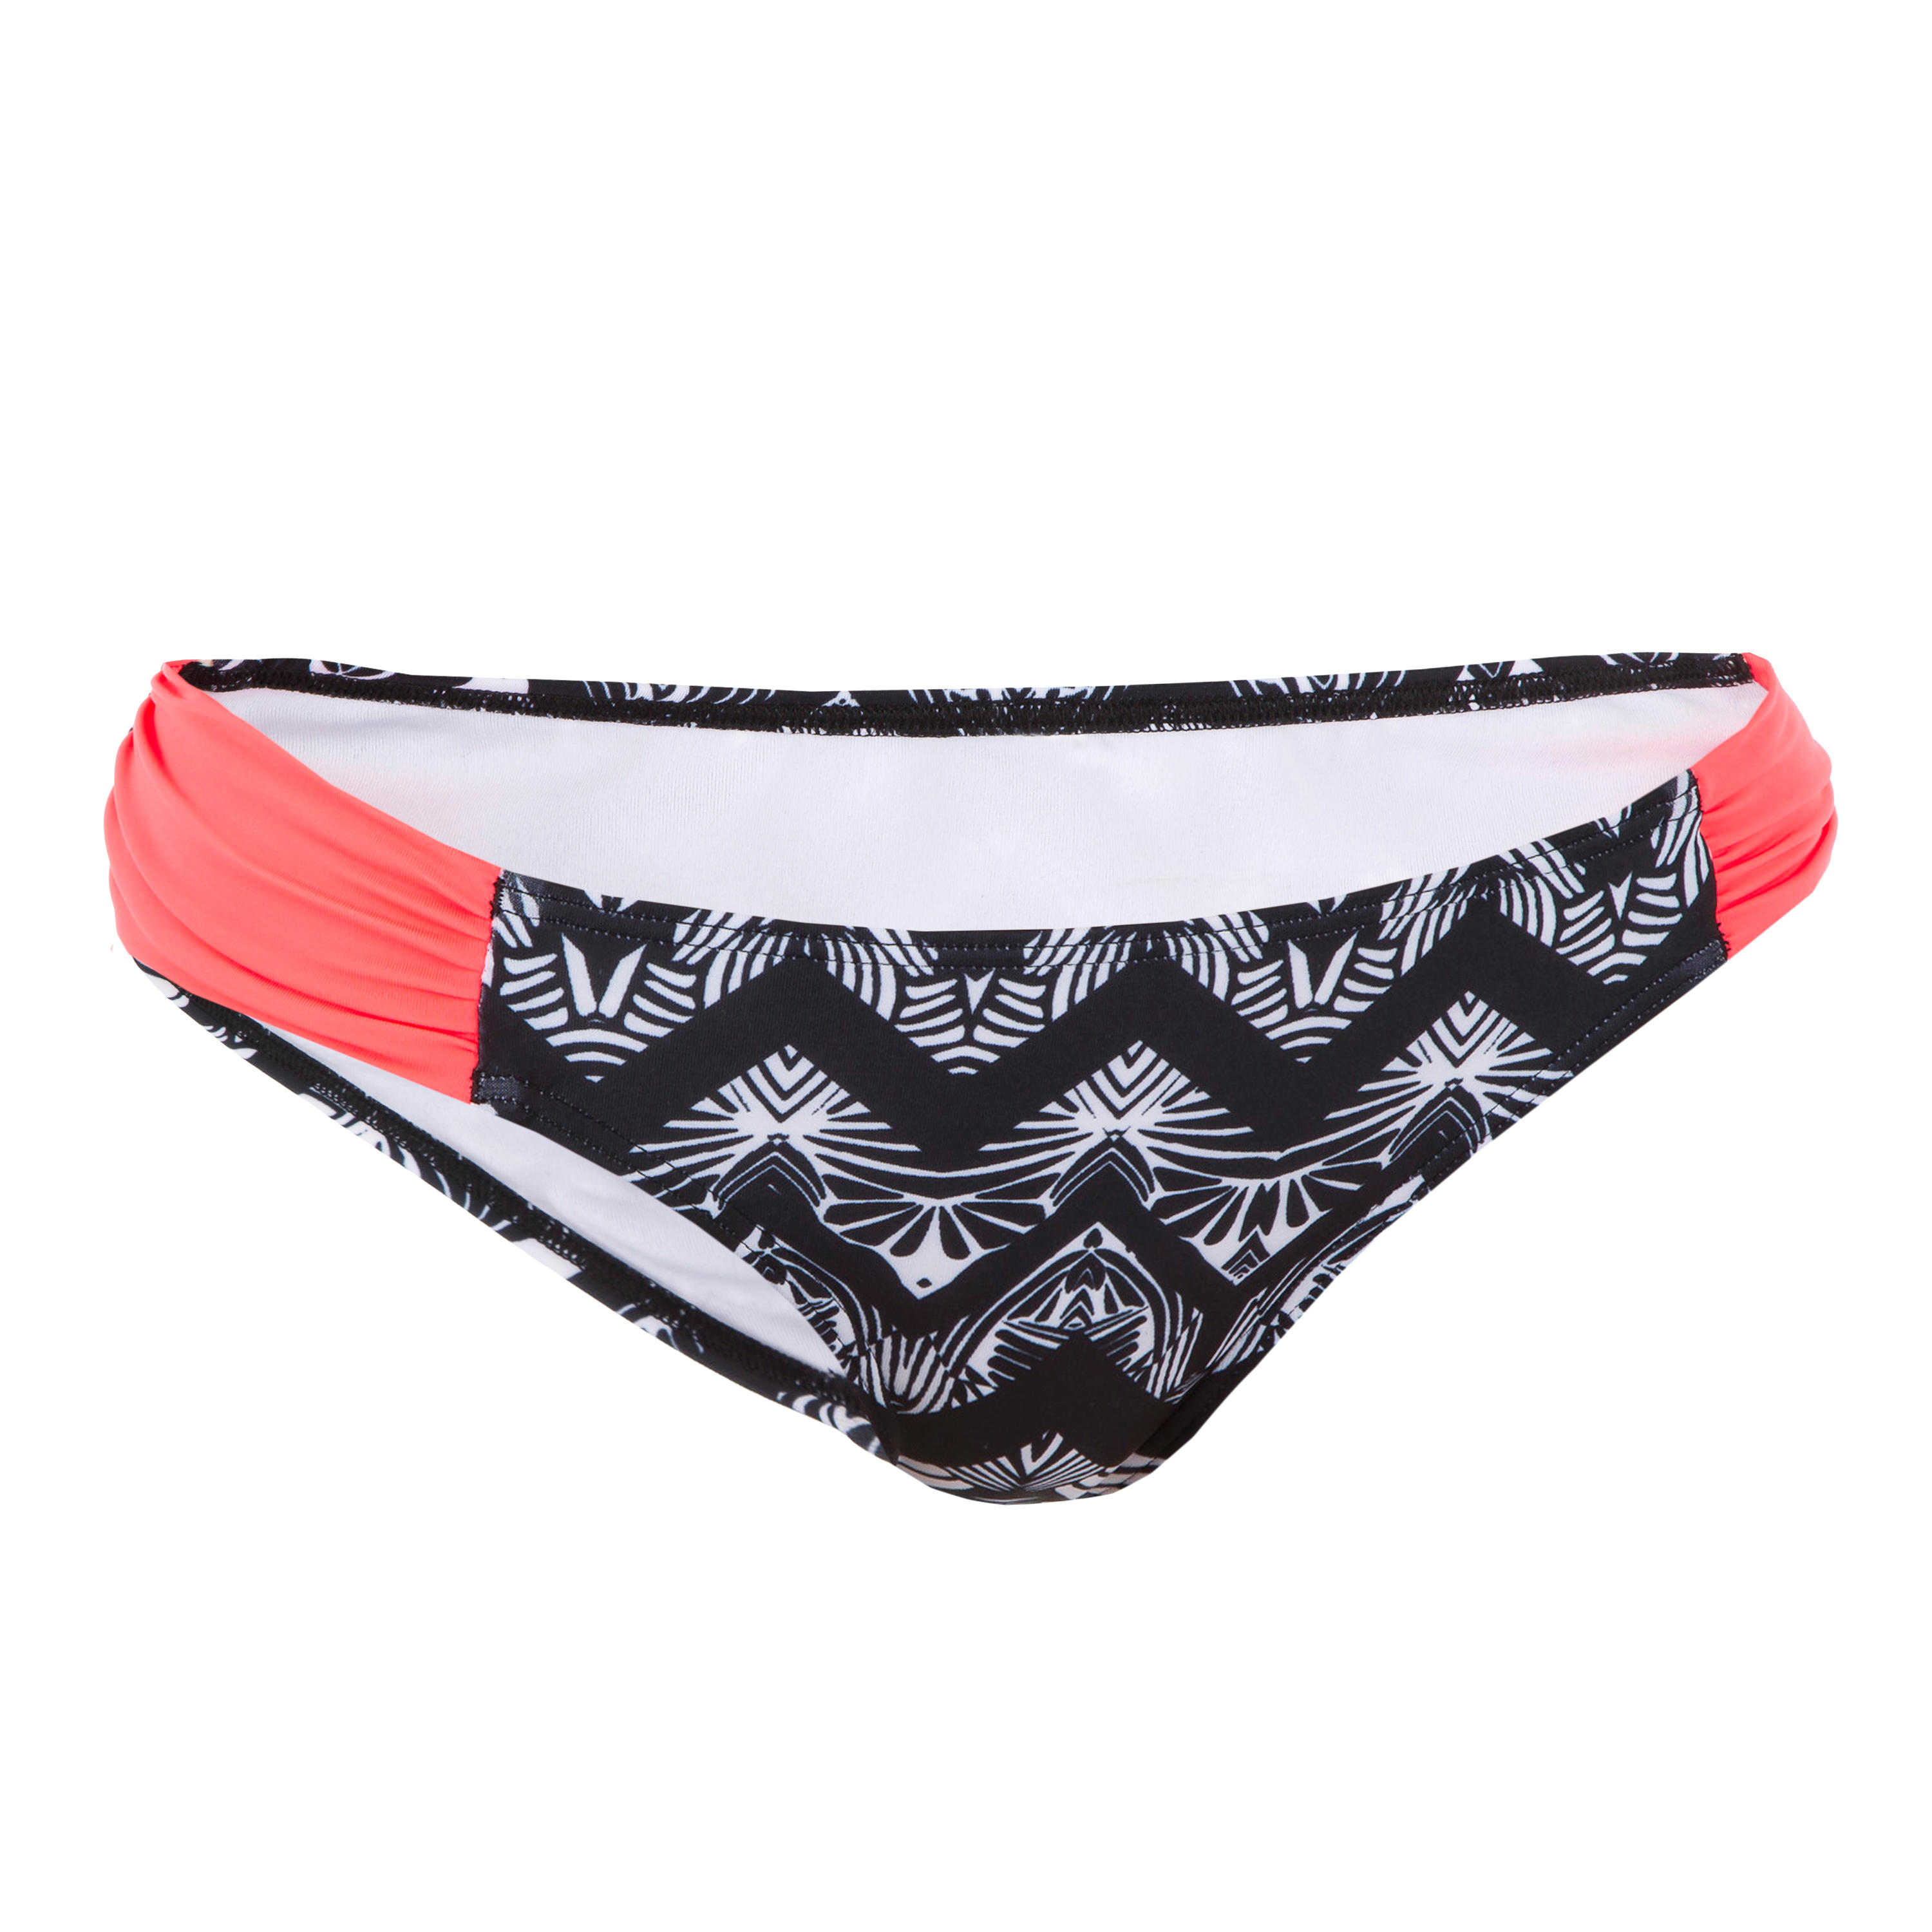 OLAIAN Women's surfing swimsuit bottoms with gathering at the sides NIKI MAWA